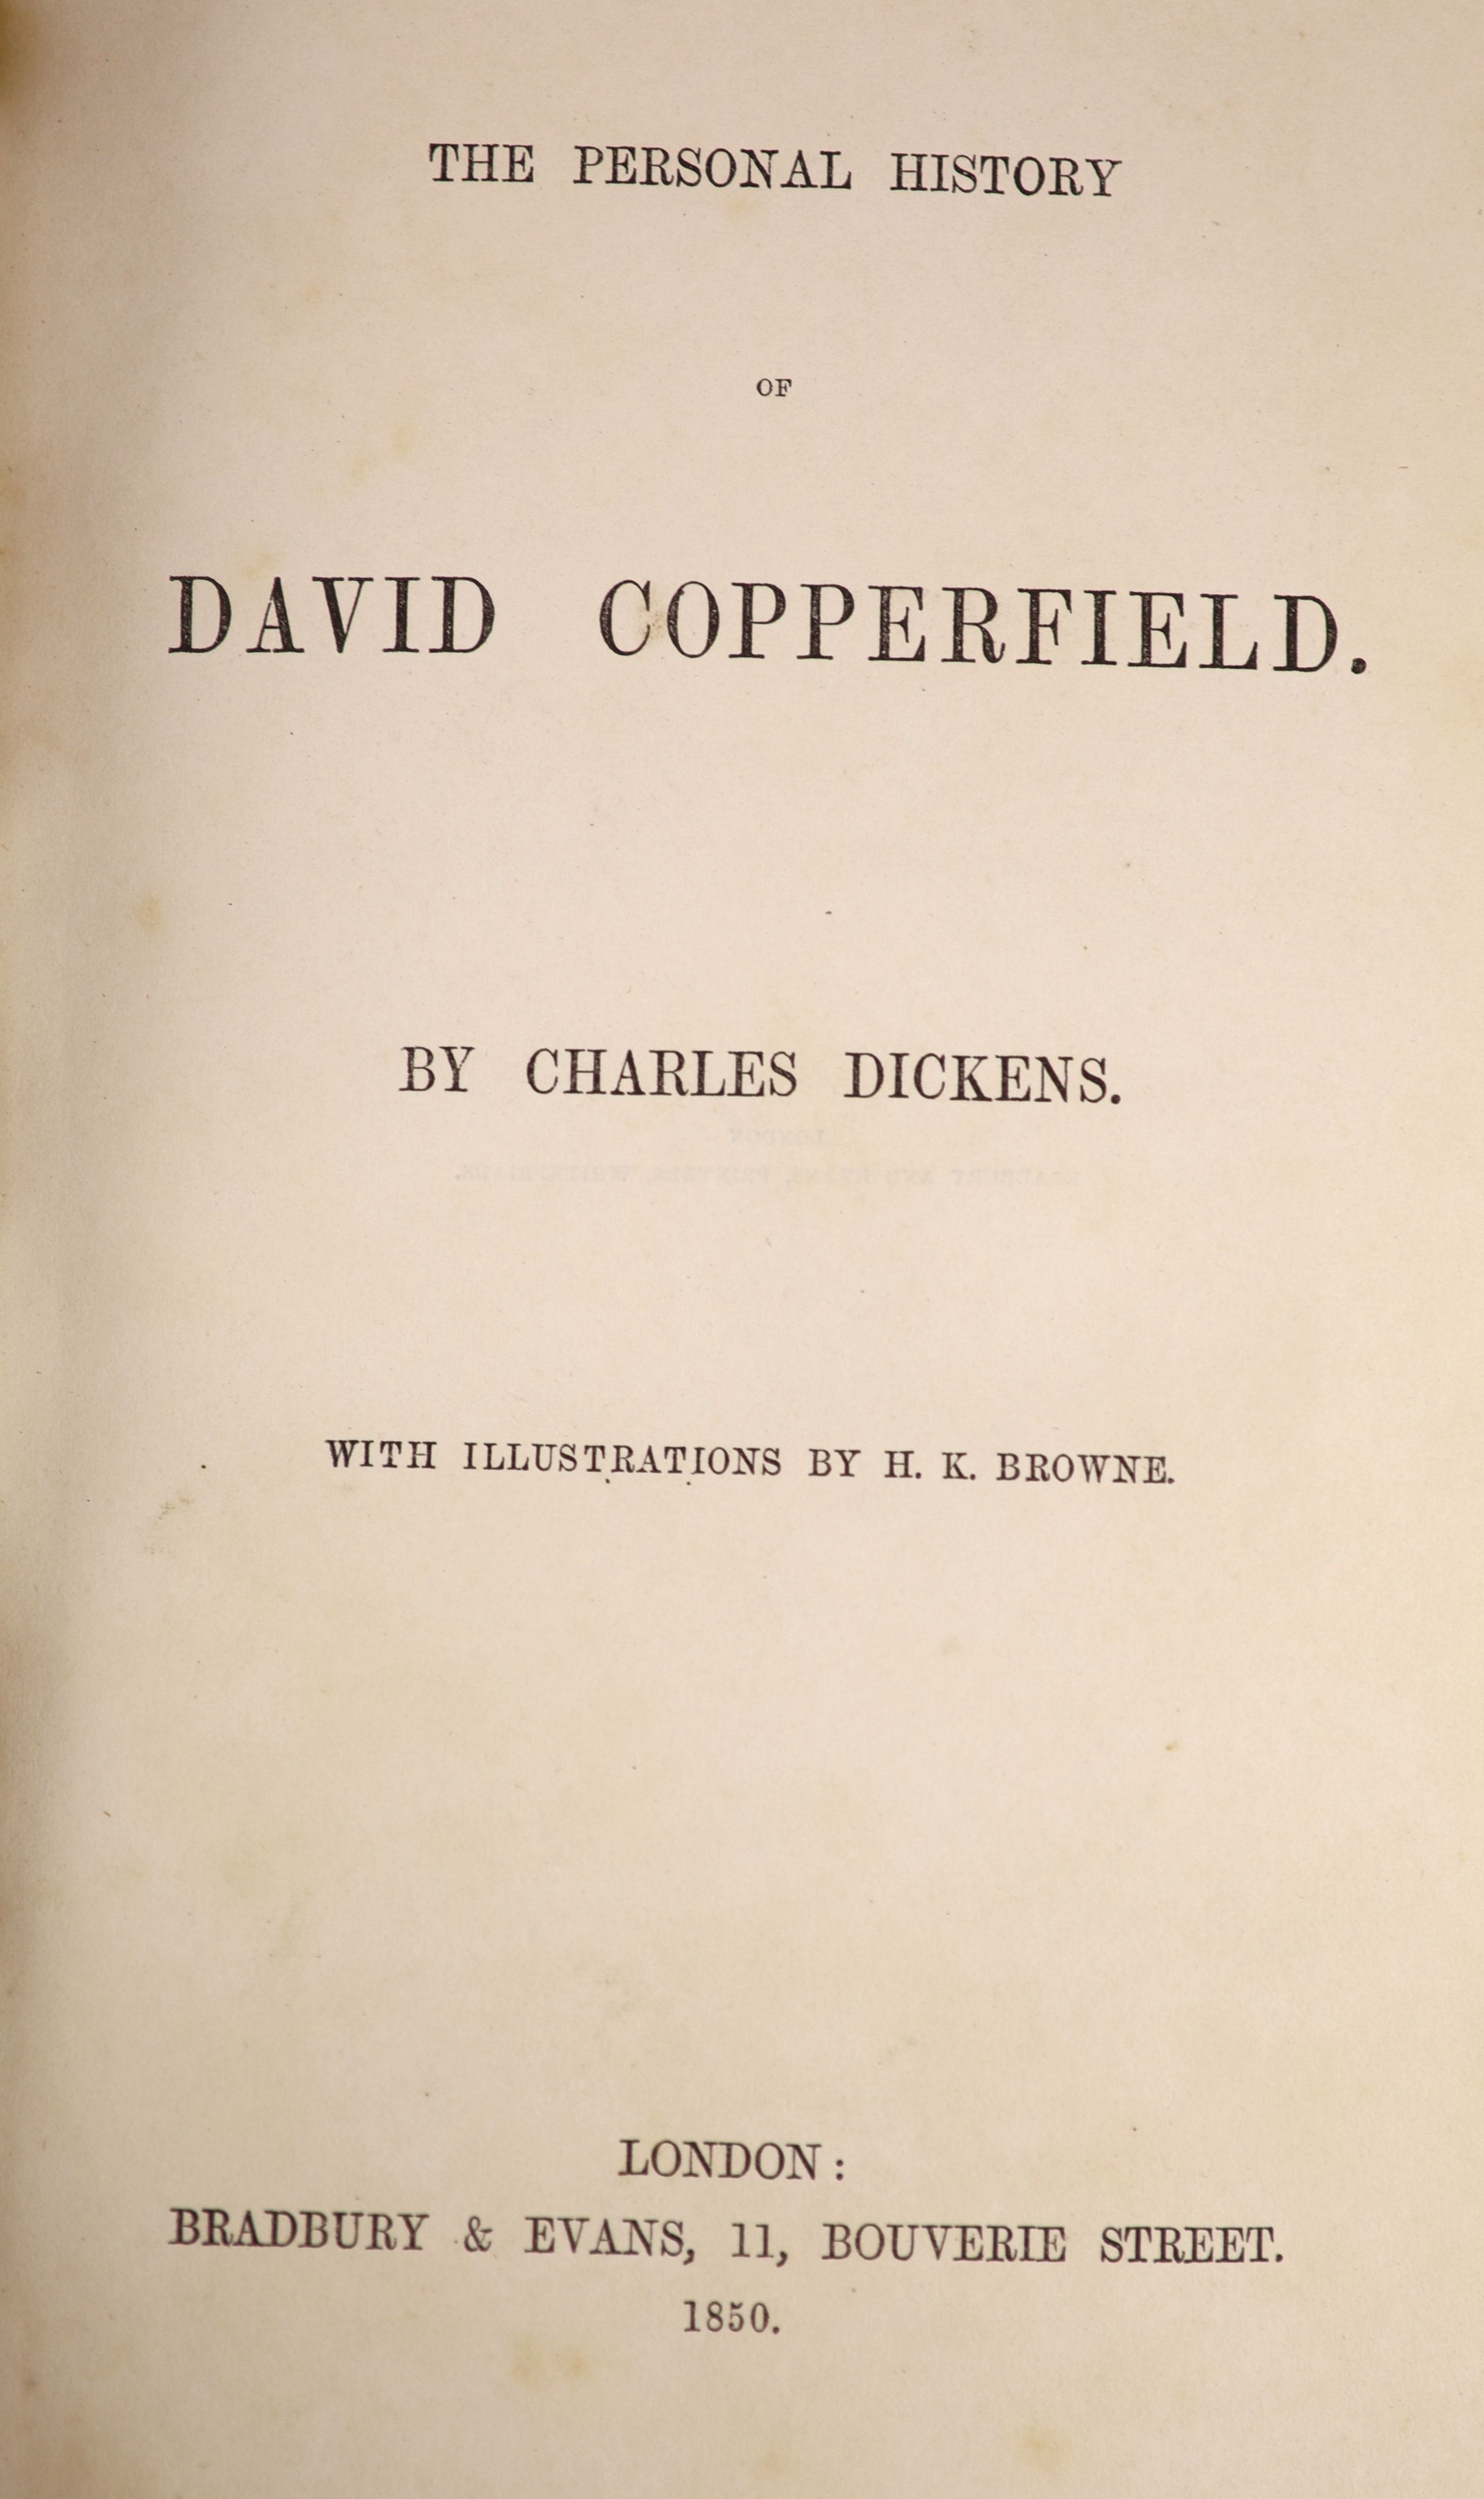 Dickens, Charles - The Personal History of David Copperfield. Pictorial engraved and printed titles, frontis and 38 other engraved plates (H.K.Browne). Half title and errata leaf. Old half morocco and marble boards. Gilt